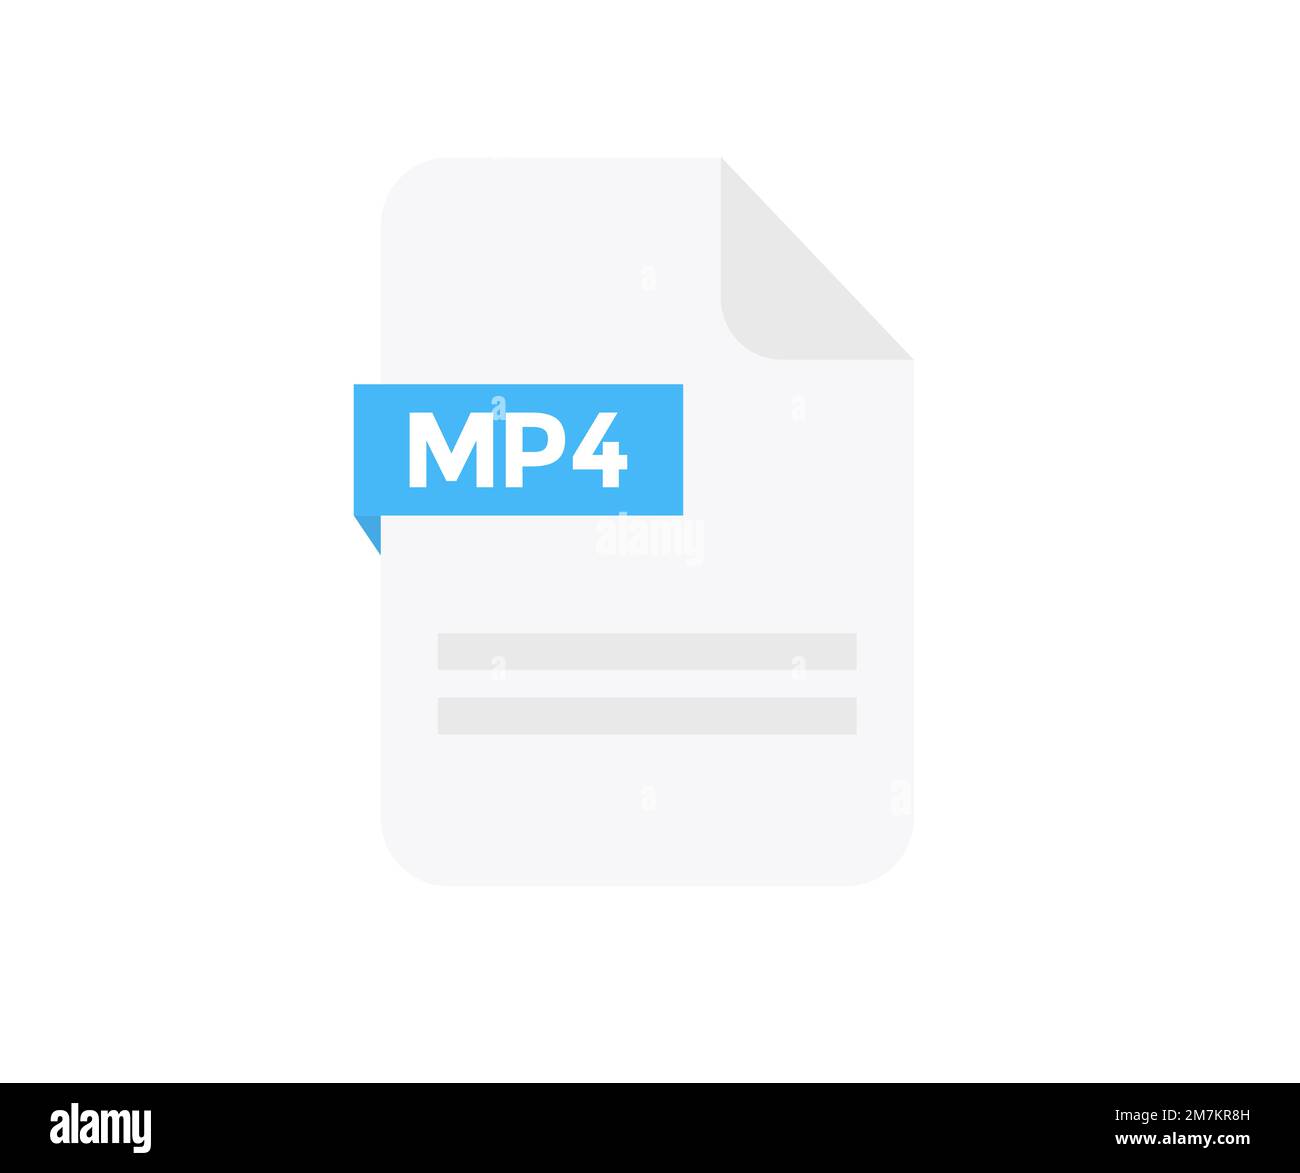 File format MP4 logo design. Document file icon, internet, extension, sign, type, presentation, graphic, application. Element for applications. Stock Vector